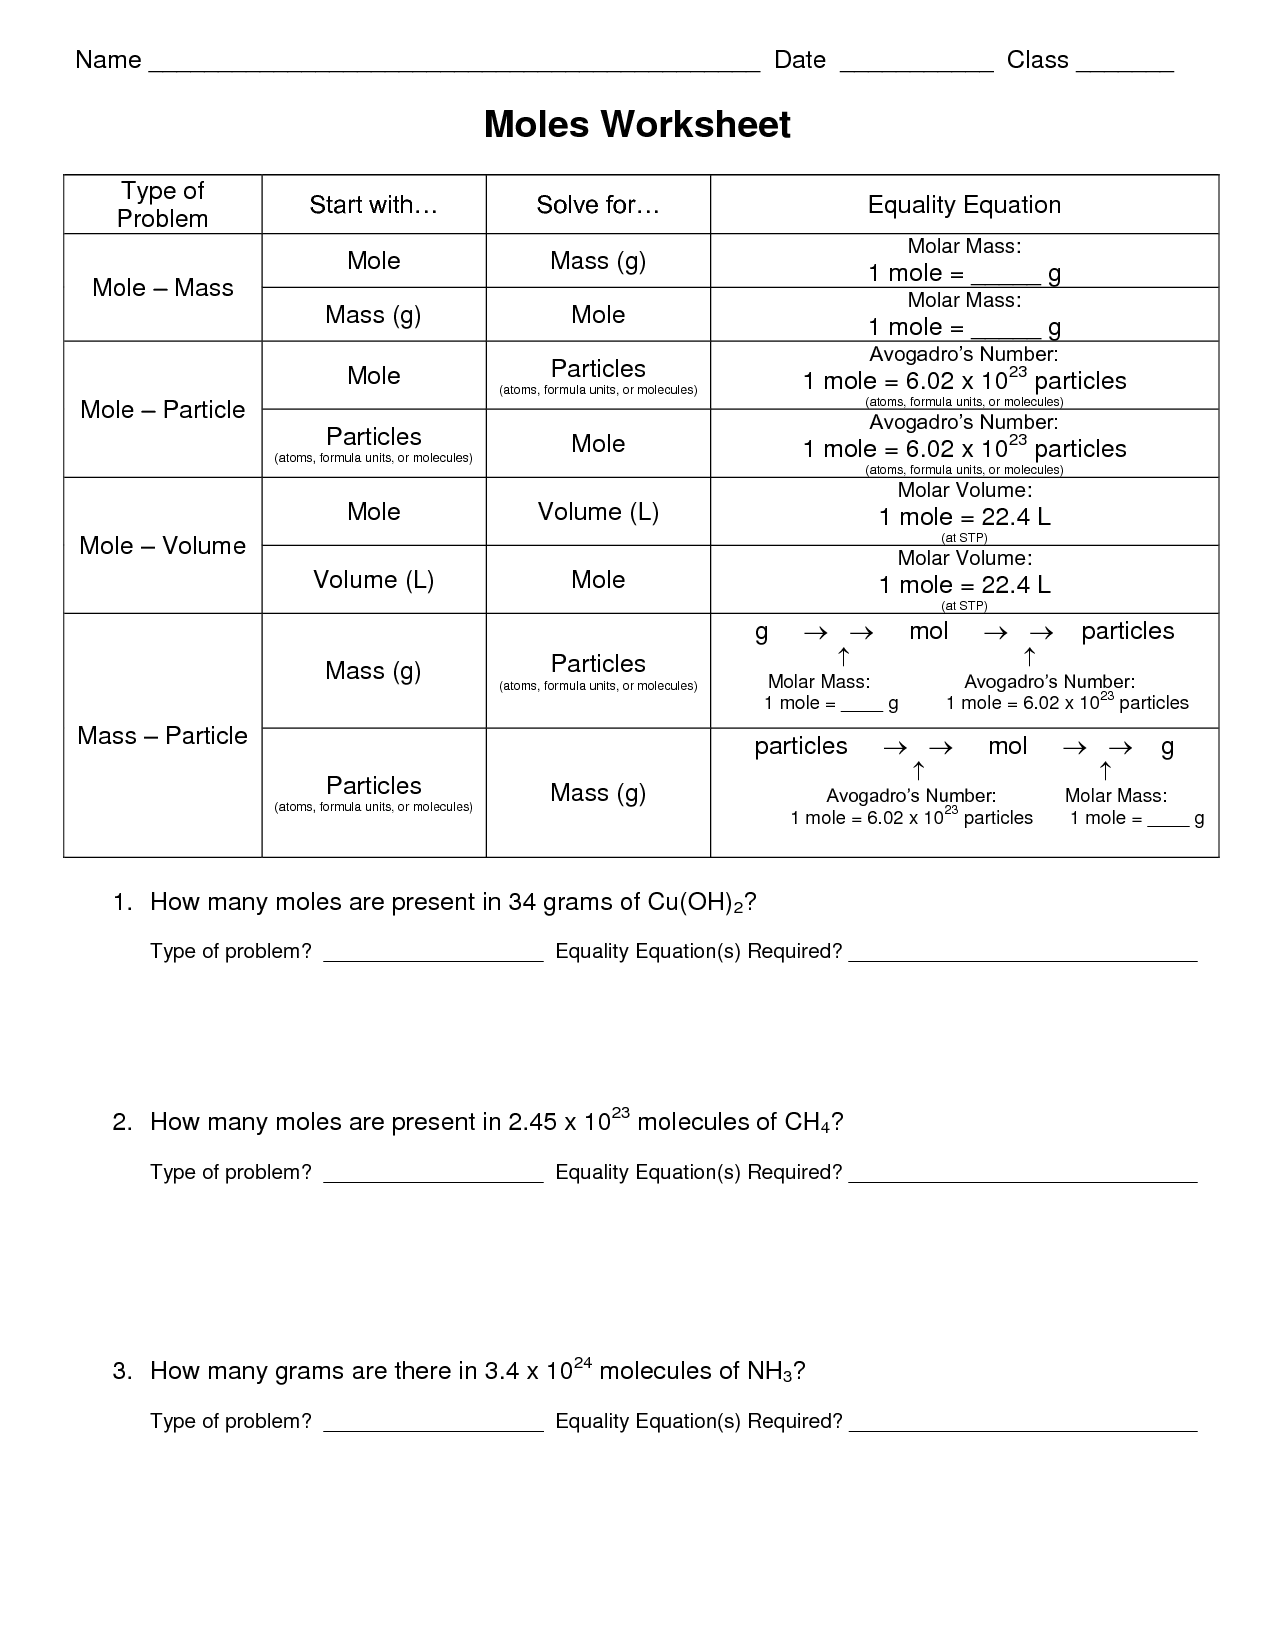 Molar Mass Moles and Avogadros Number Worksheet Image